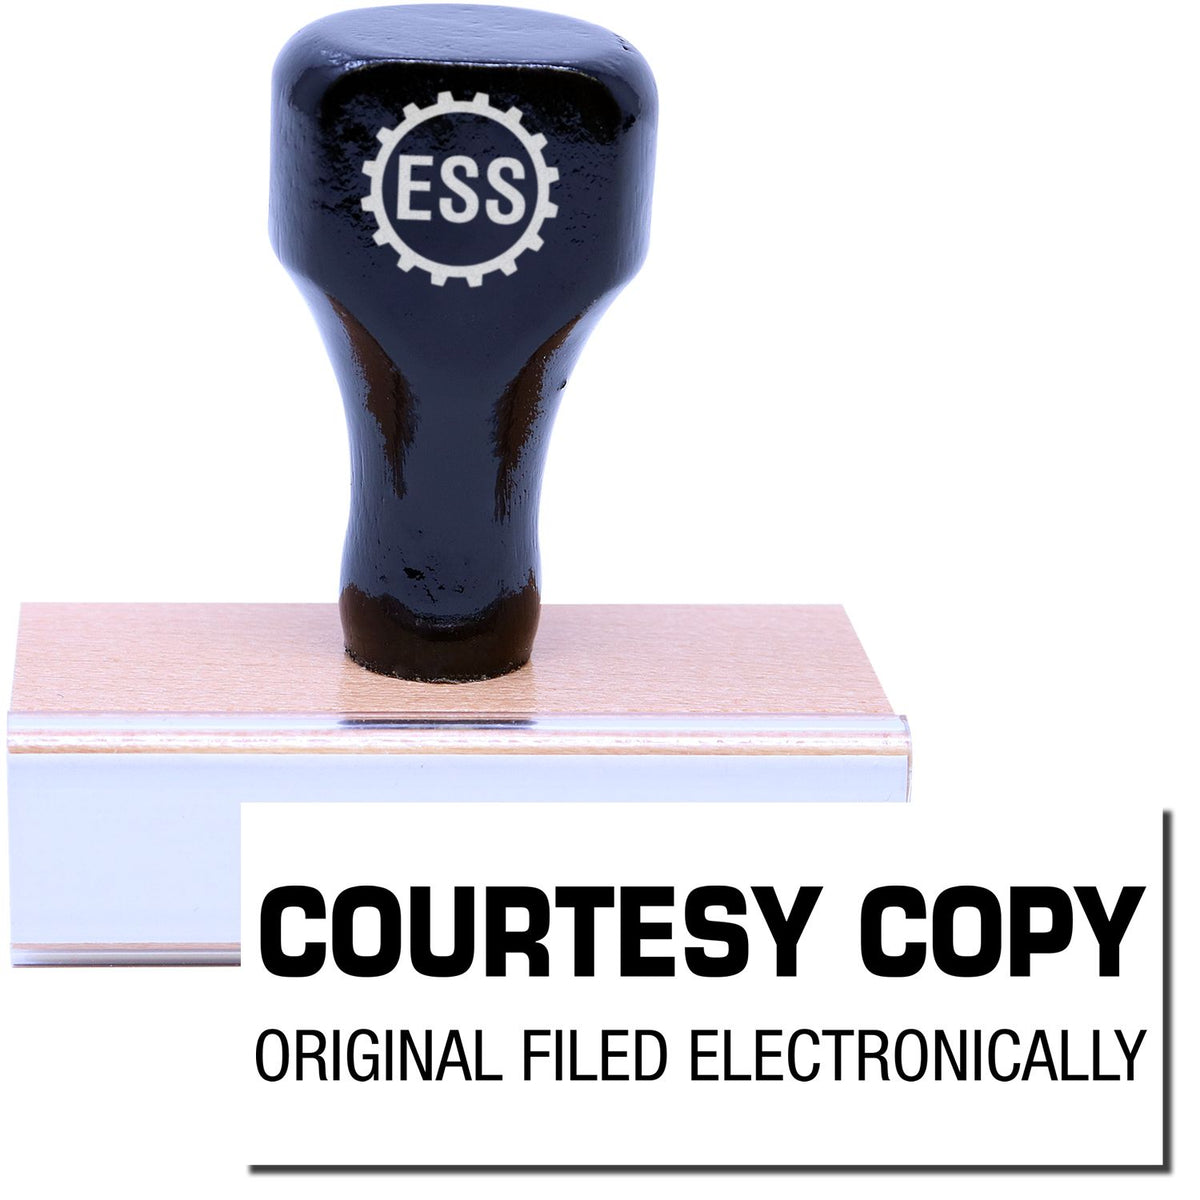 A stock office rubber stamp with a stamped image showing how the text &quot;COURTESY COPY ORIGINAL FILED ELECTRONICALLY&quot; is displayed after stamping.